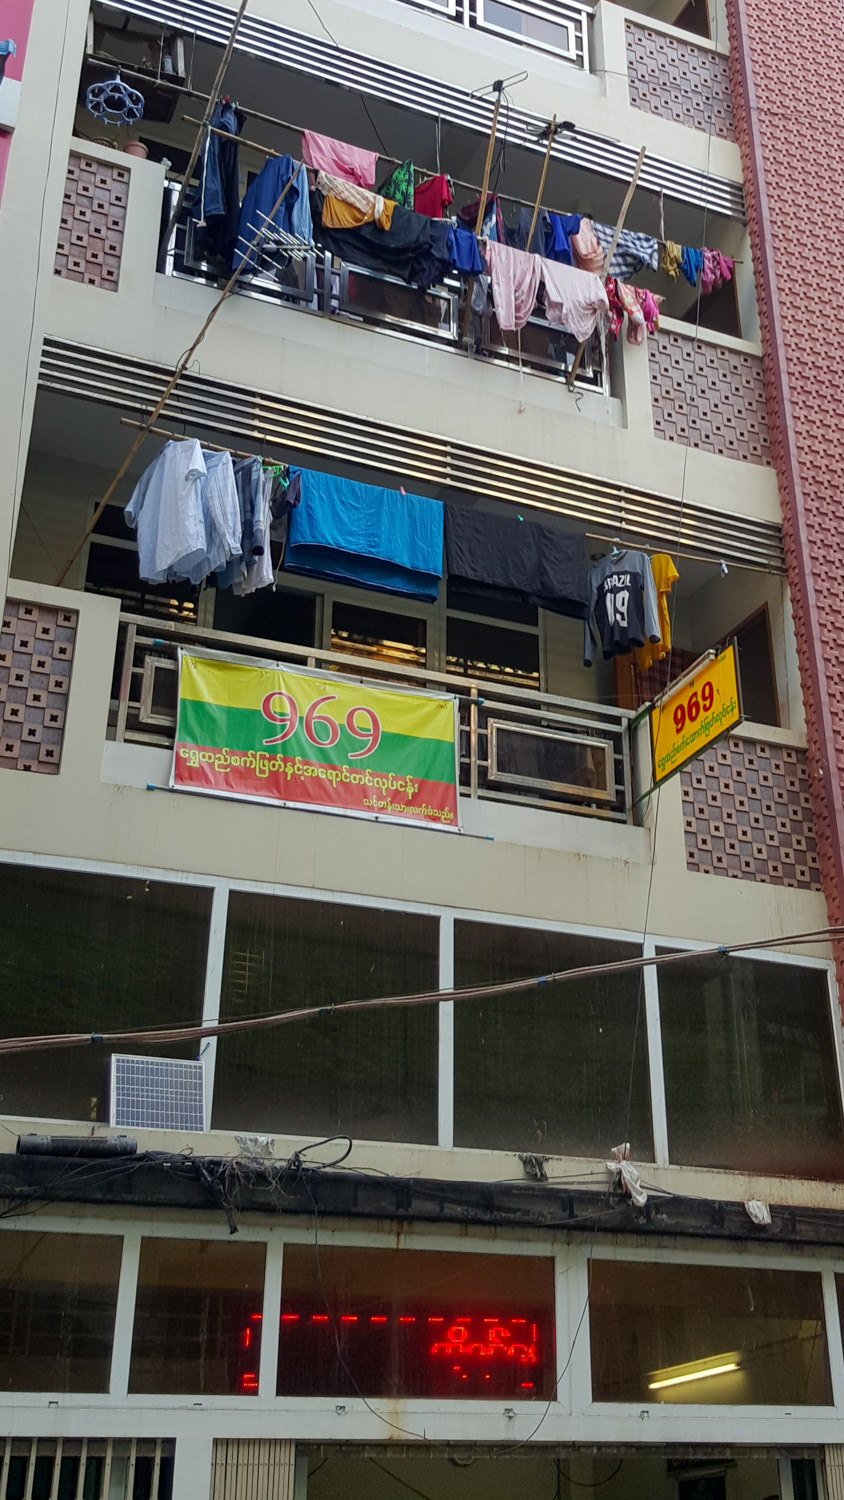 And just down from the mosque, a 969 flag on someone's balcony (969 are the local violently anti-islamic group).